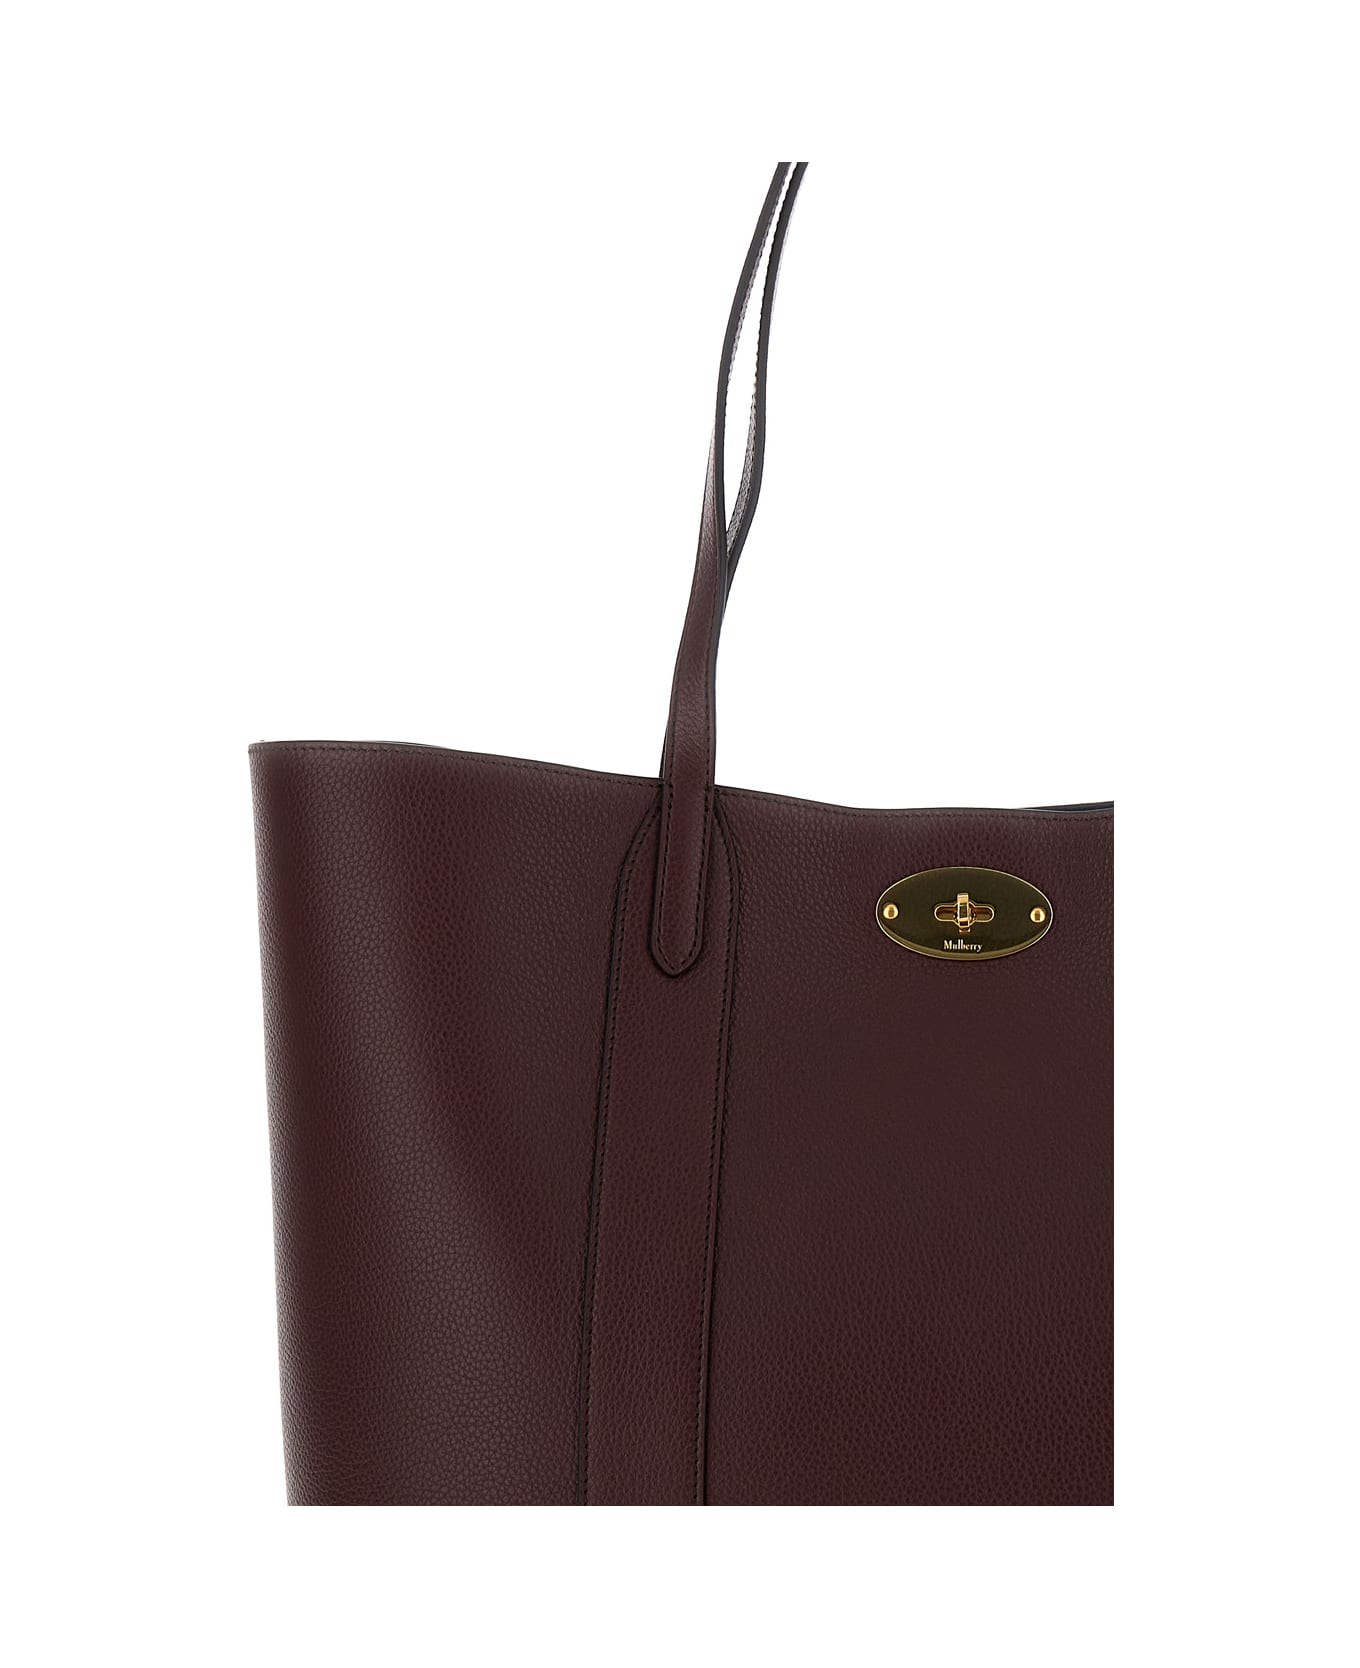 Mulberry Bayswater Tote Small Classic Grain - Bordeaux